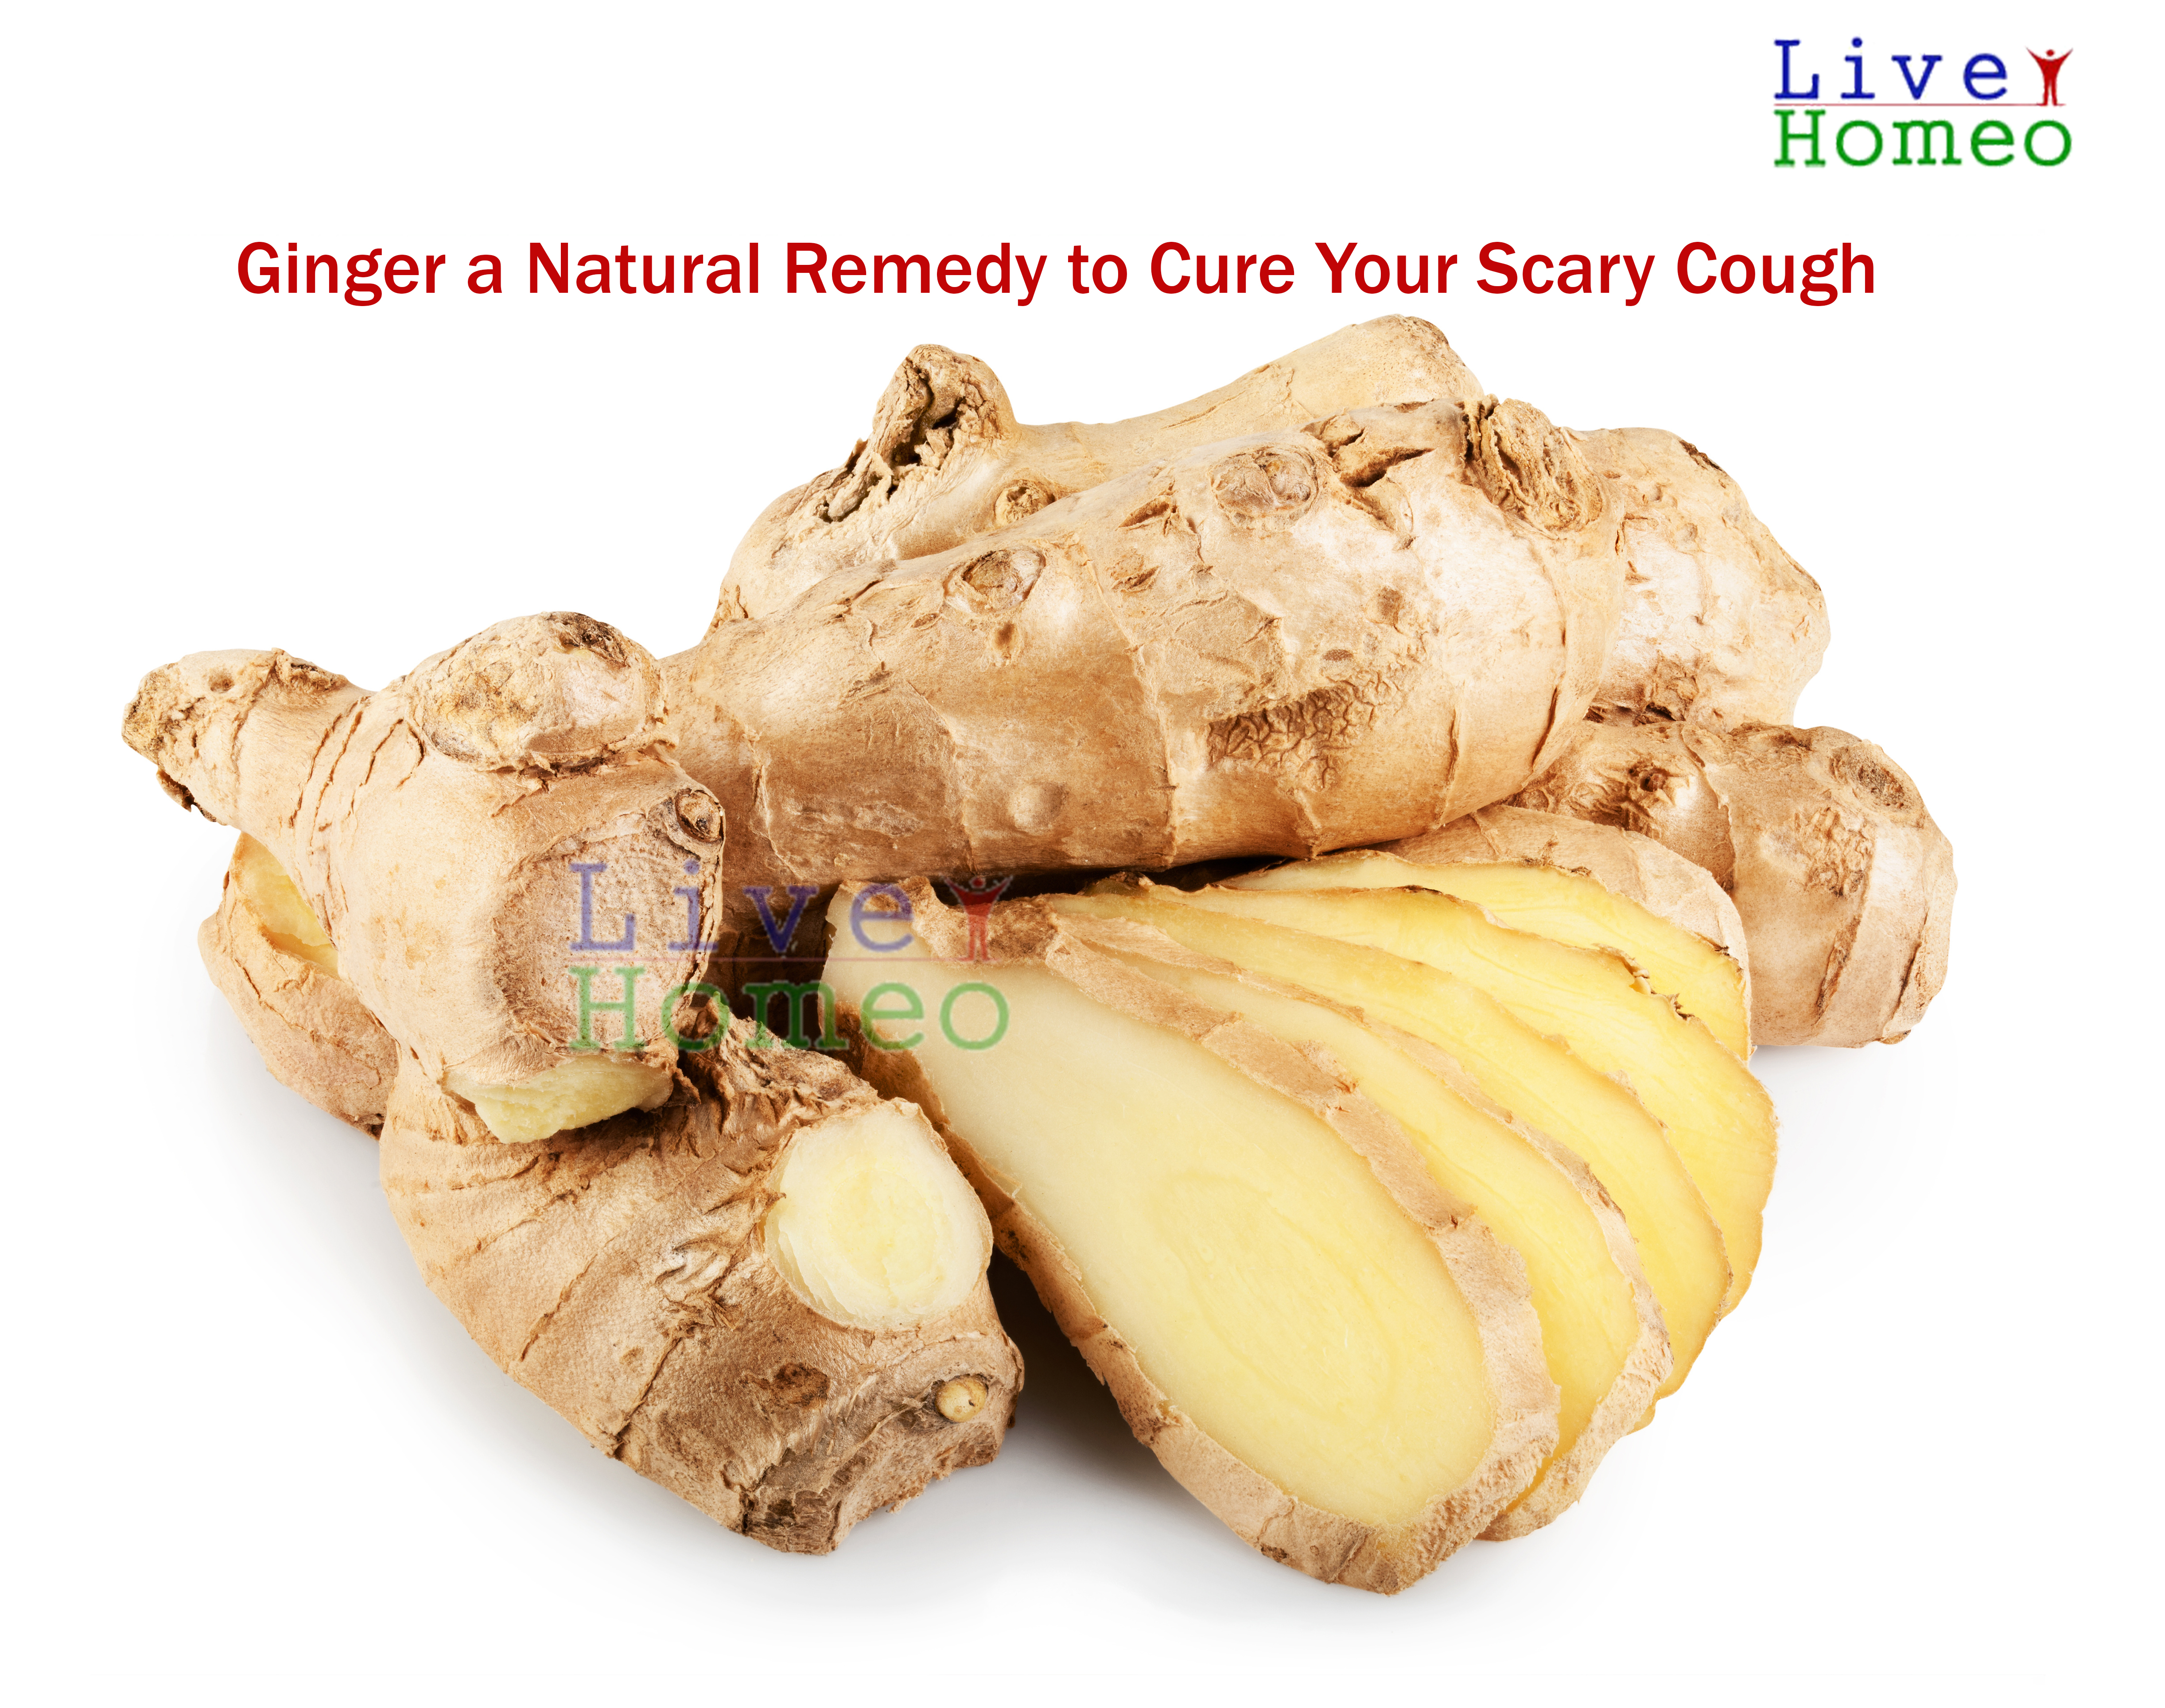 Ginger a Natural Remedy to Cure Your Scary Cough